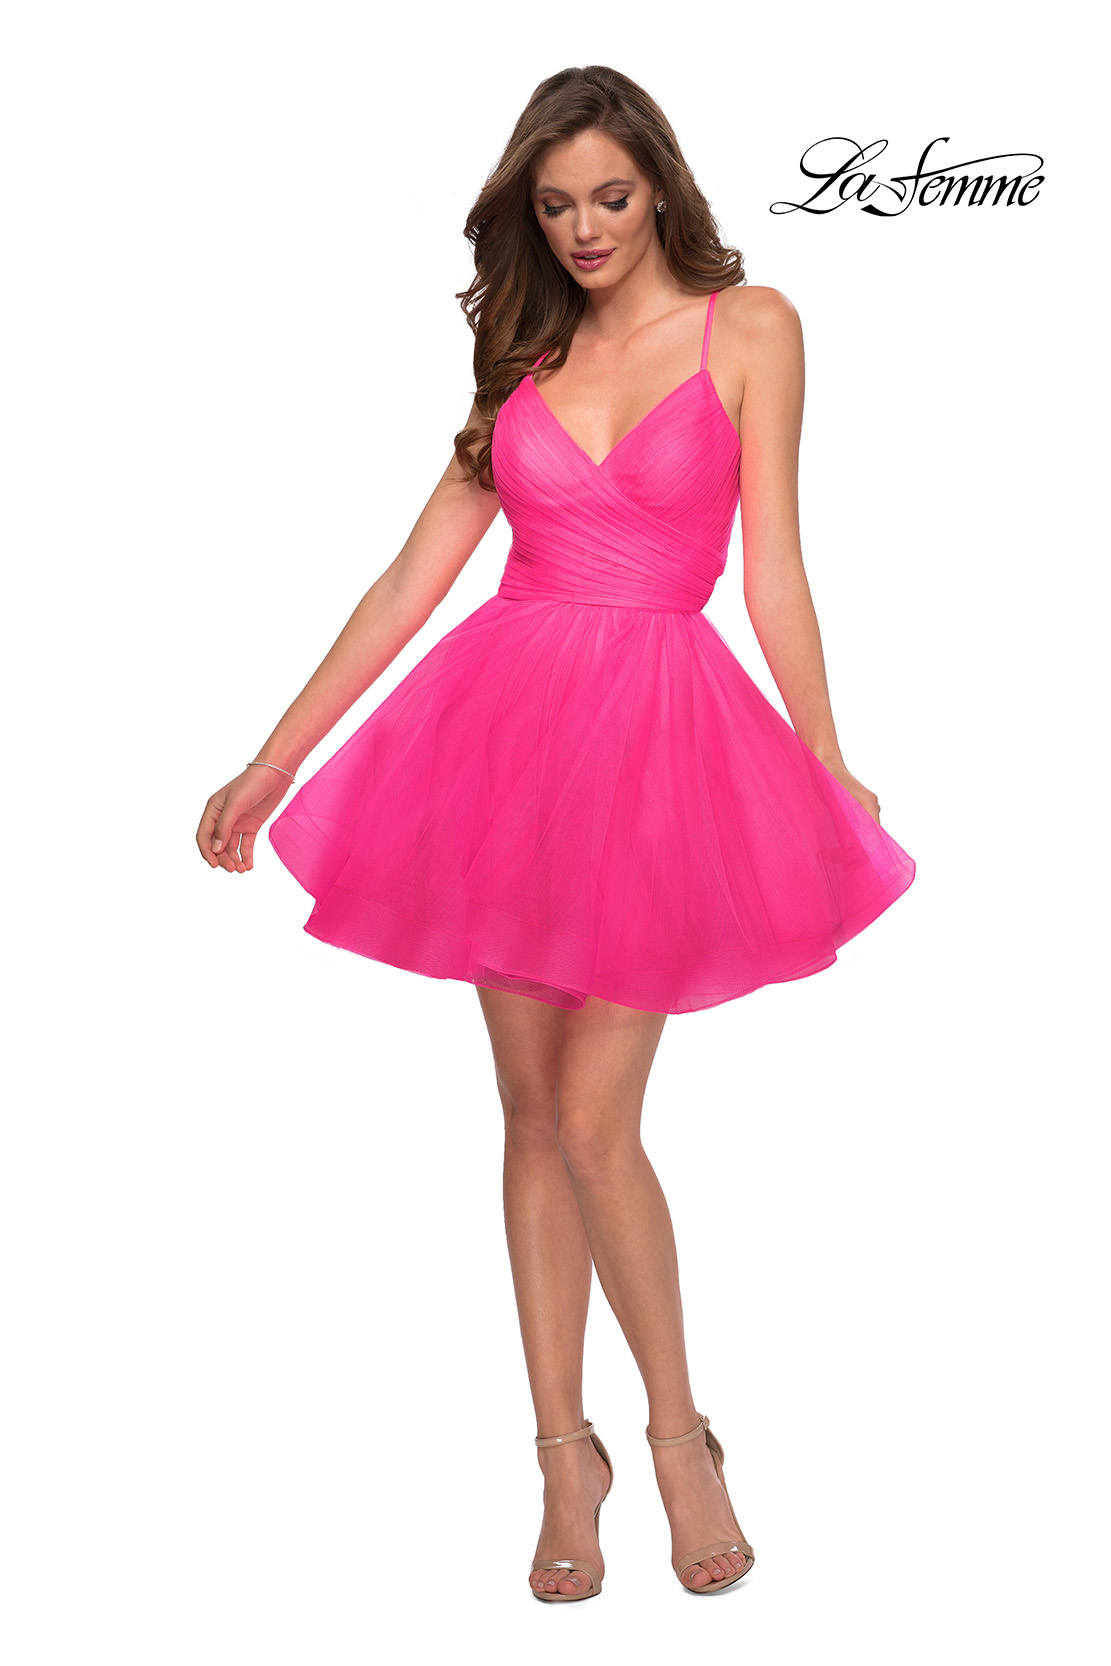 Neon Pink Short Dress for Homecoming